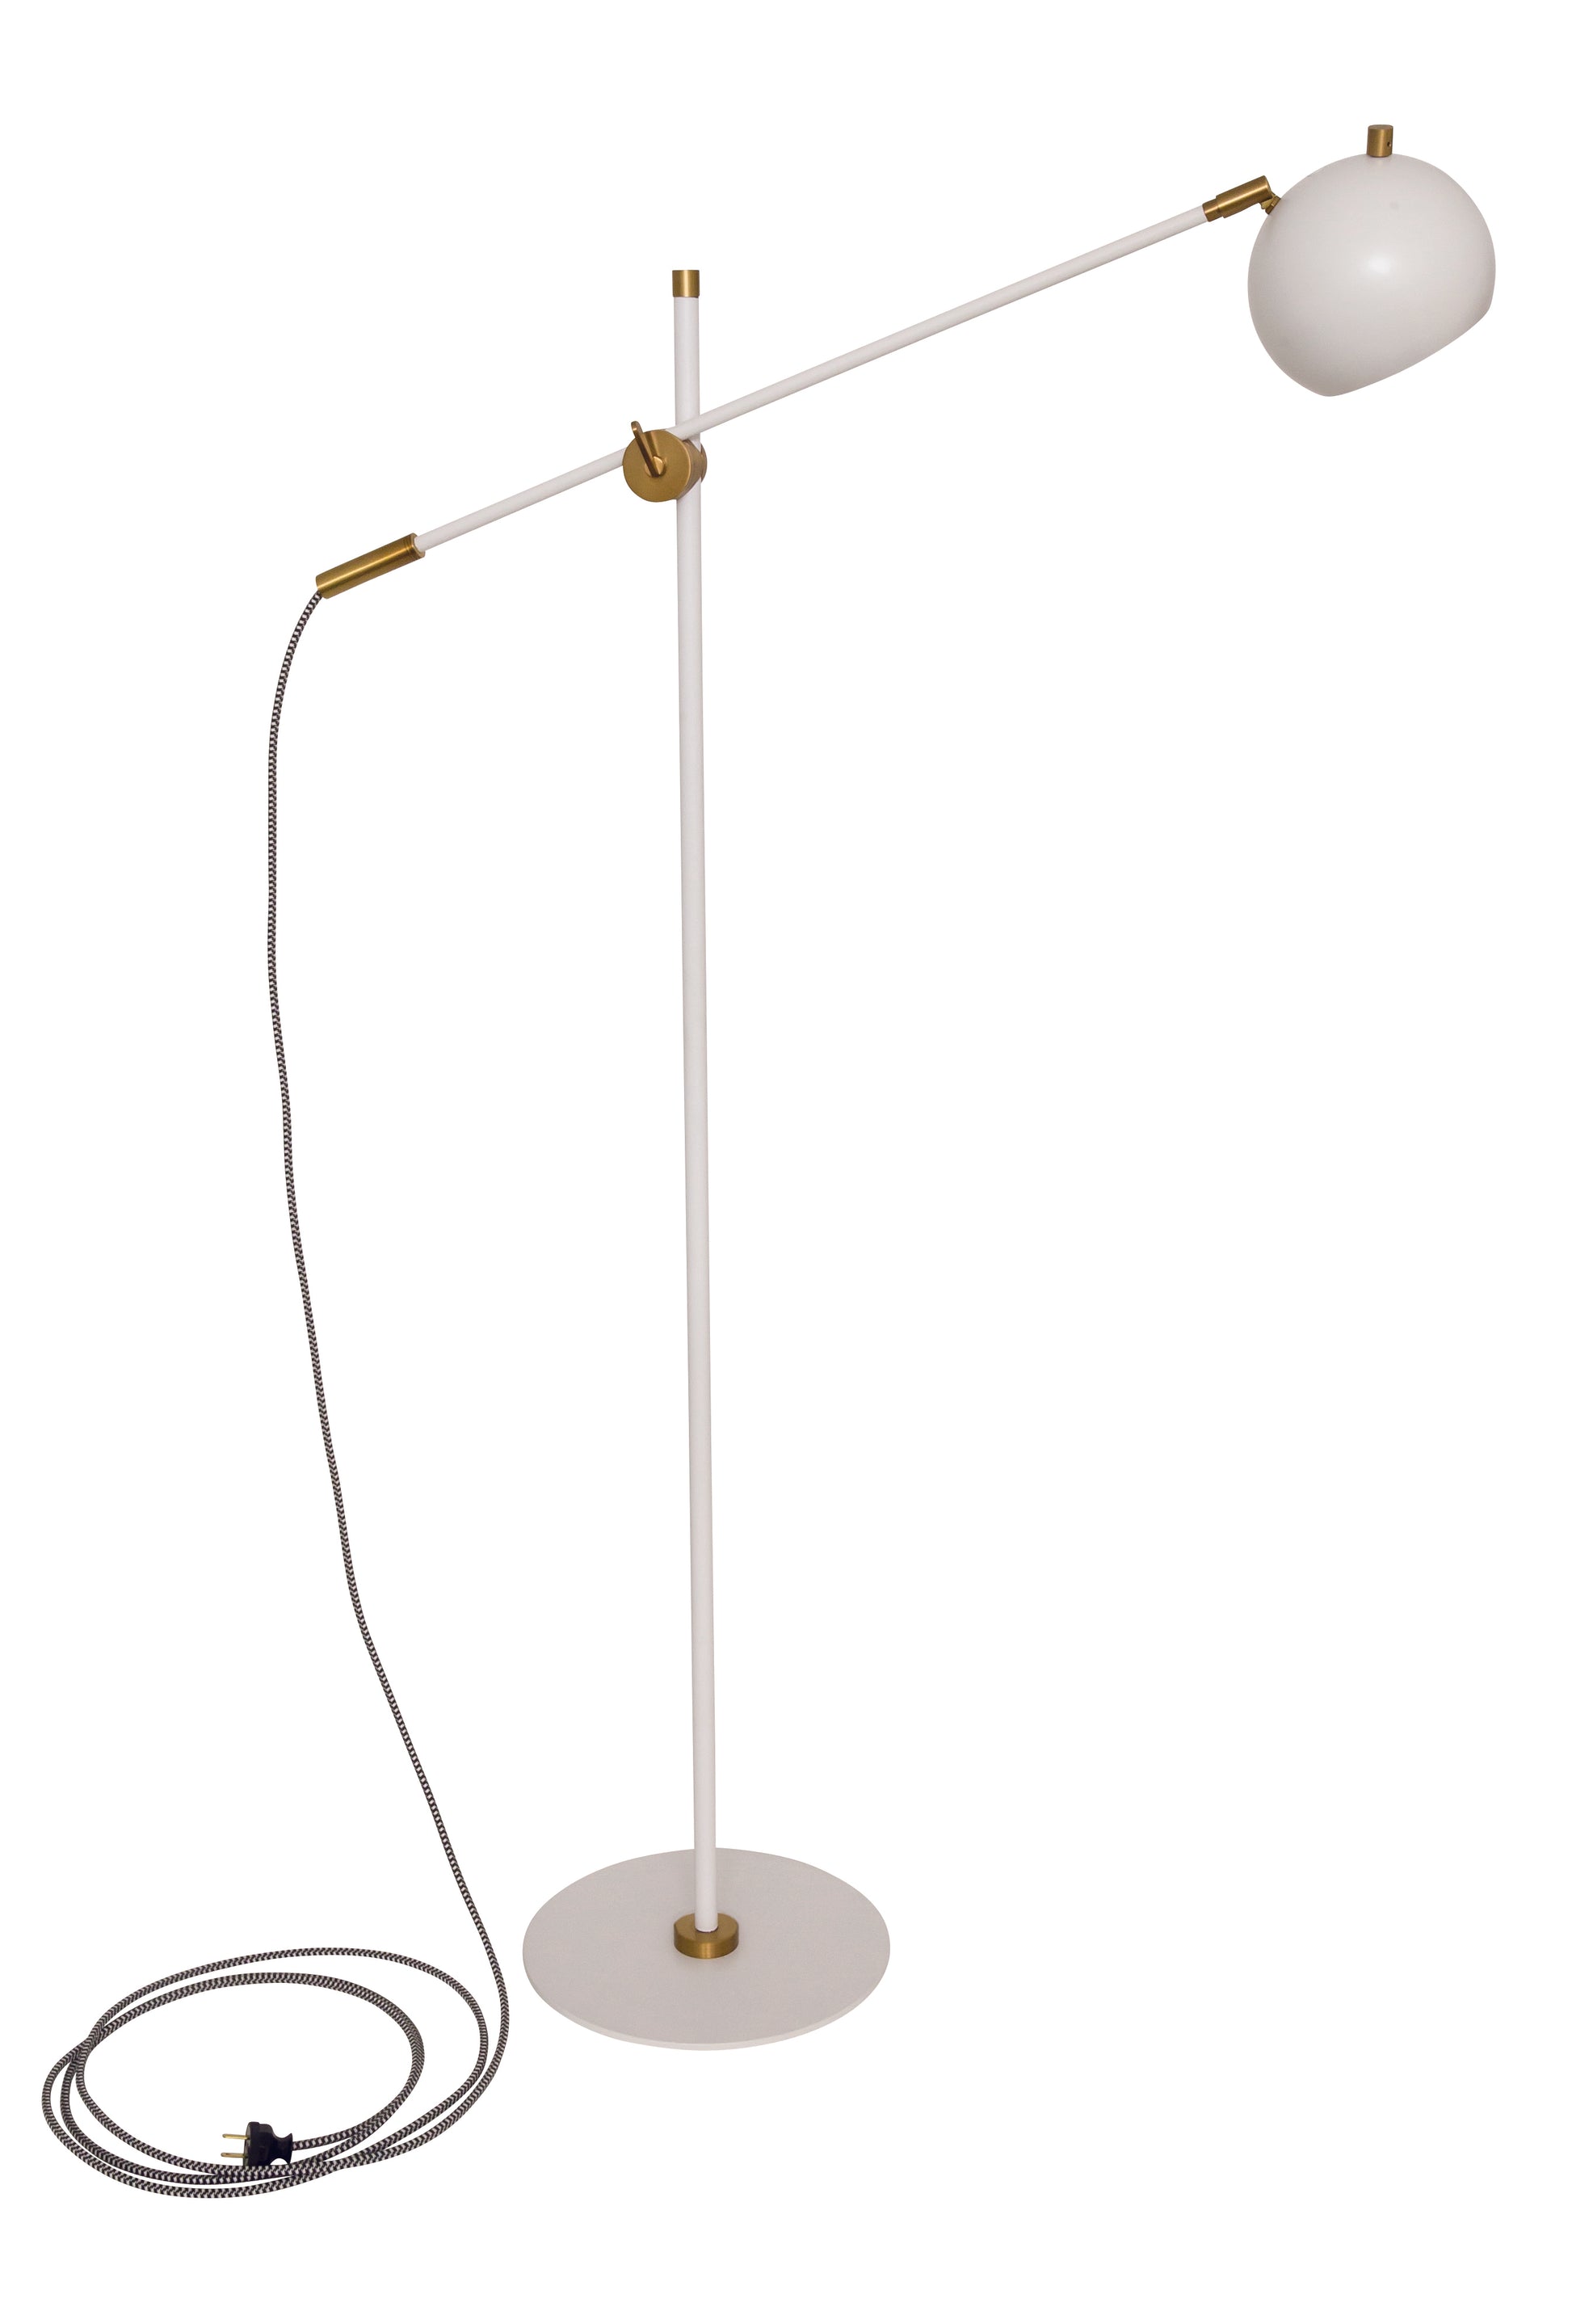 House of Troy Orwell LED Counterbalance Floor Lamp in White with Weathered Brass Accents OR700-WTWB